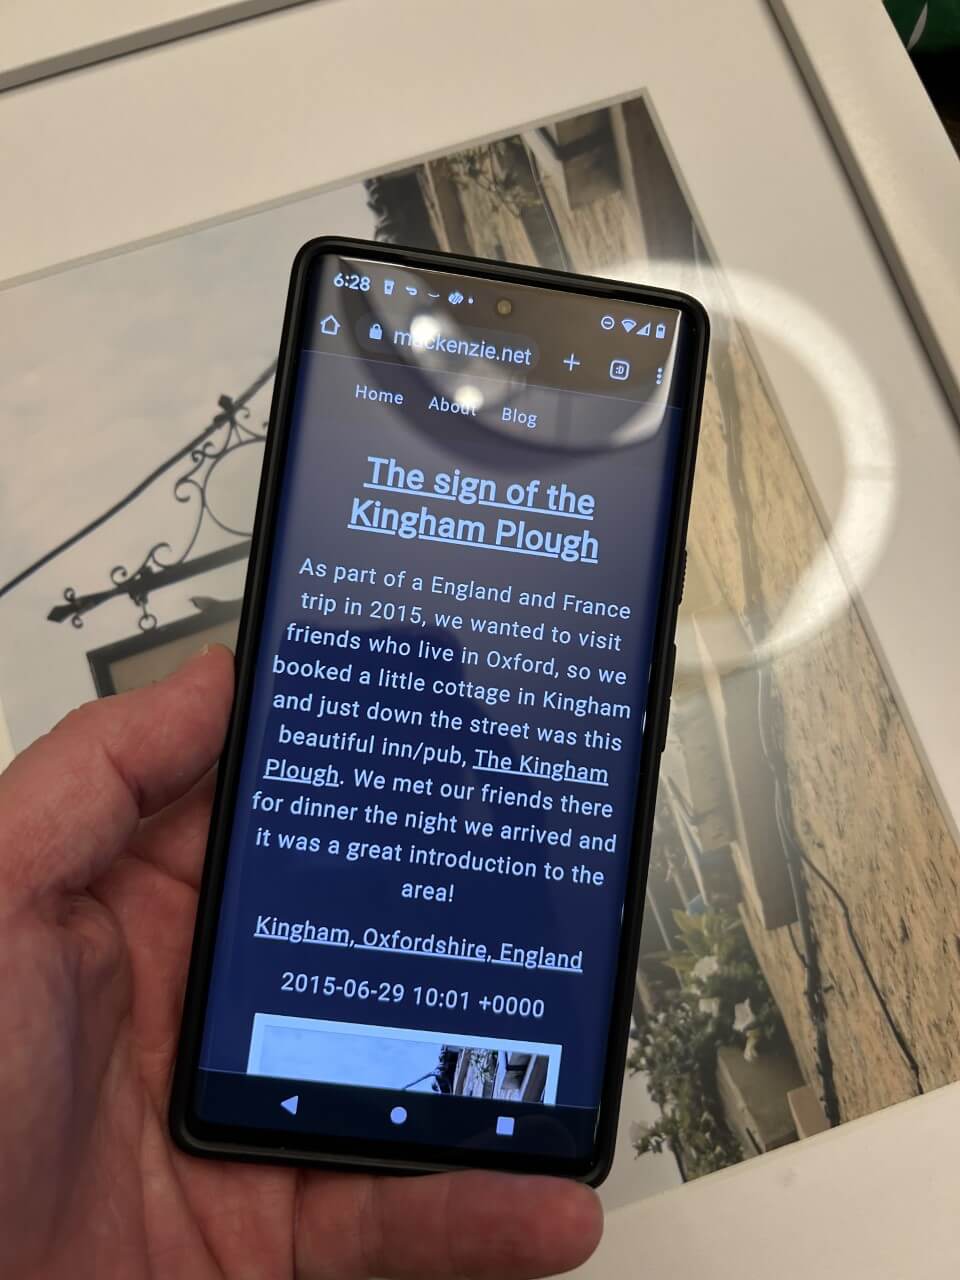 shot of an android phone held near the picture frame, photo info page visible on the device